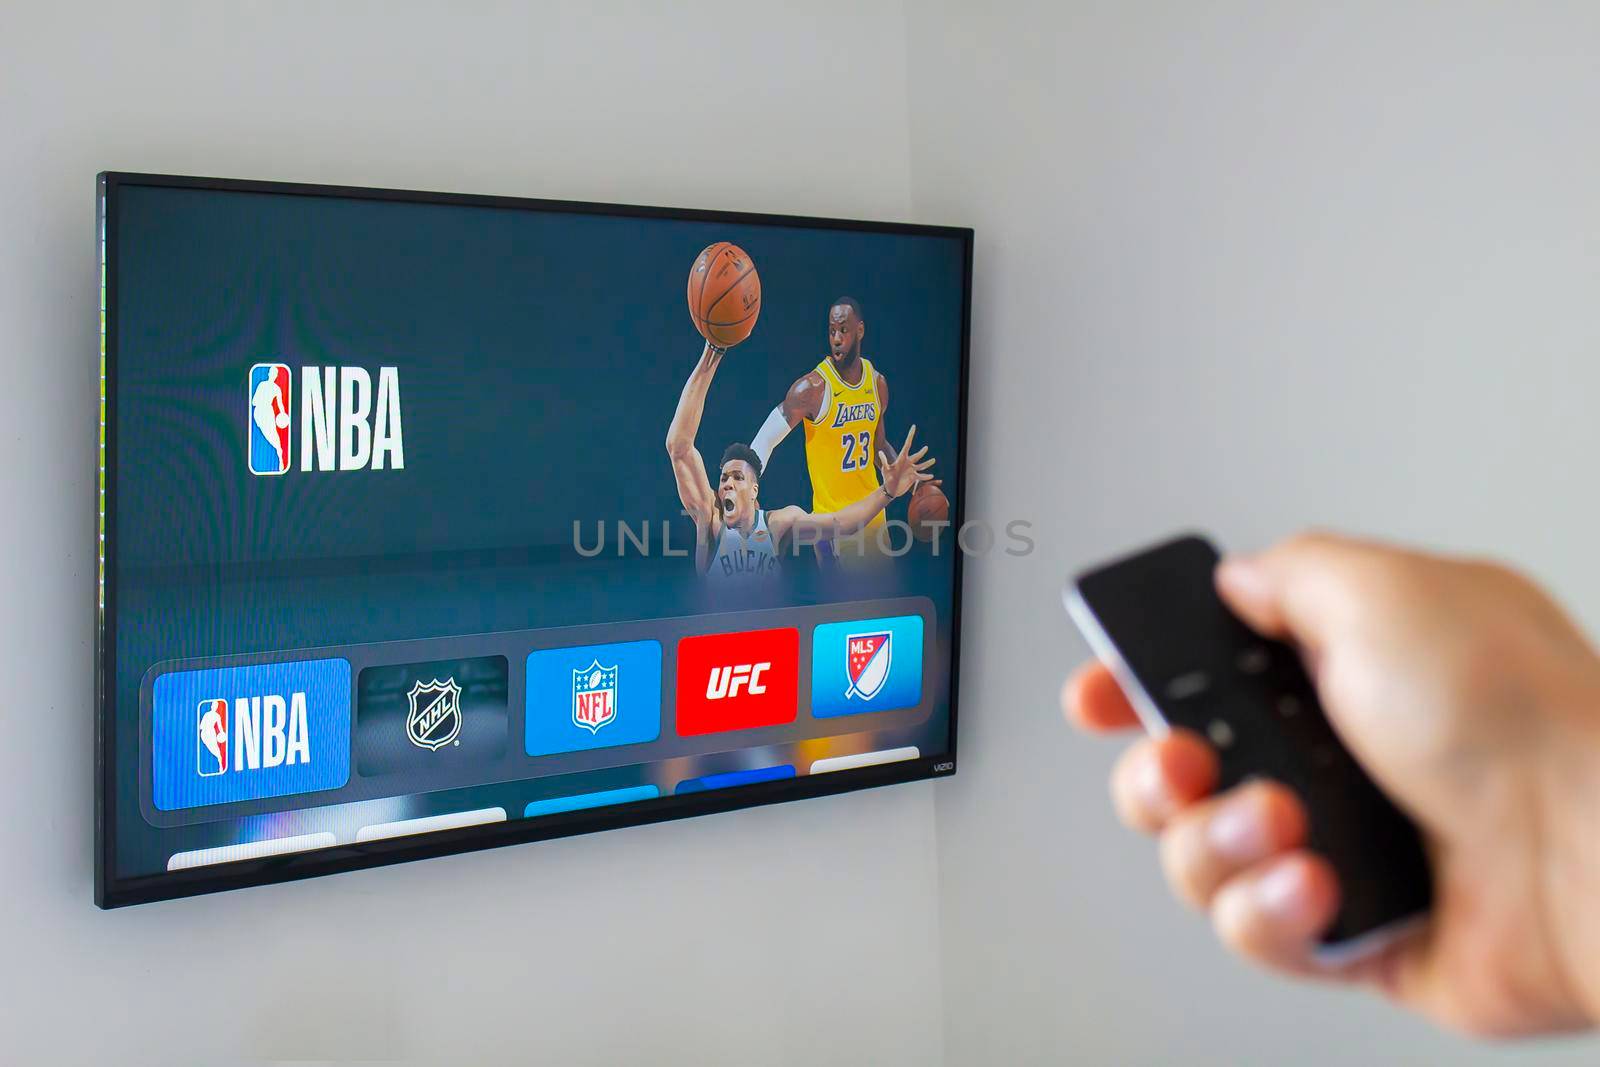 Calgary, AB, Canada. June 11, 2020. A person using an apple tv remote using the NBA application. Concept watching American basketball. by oasisamuel